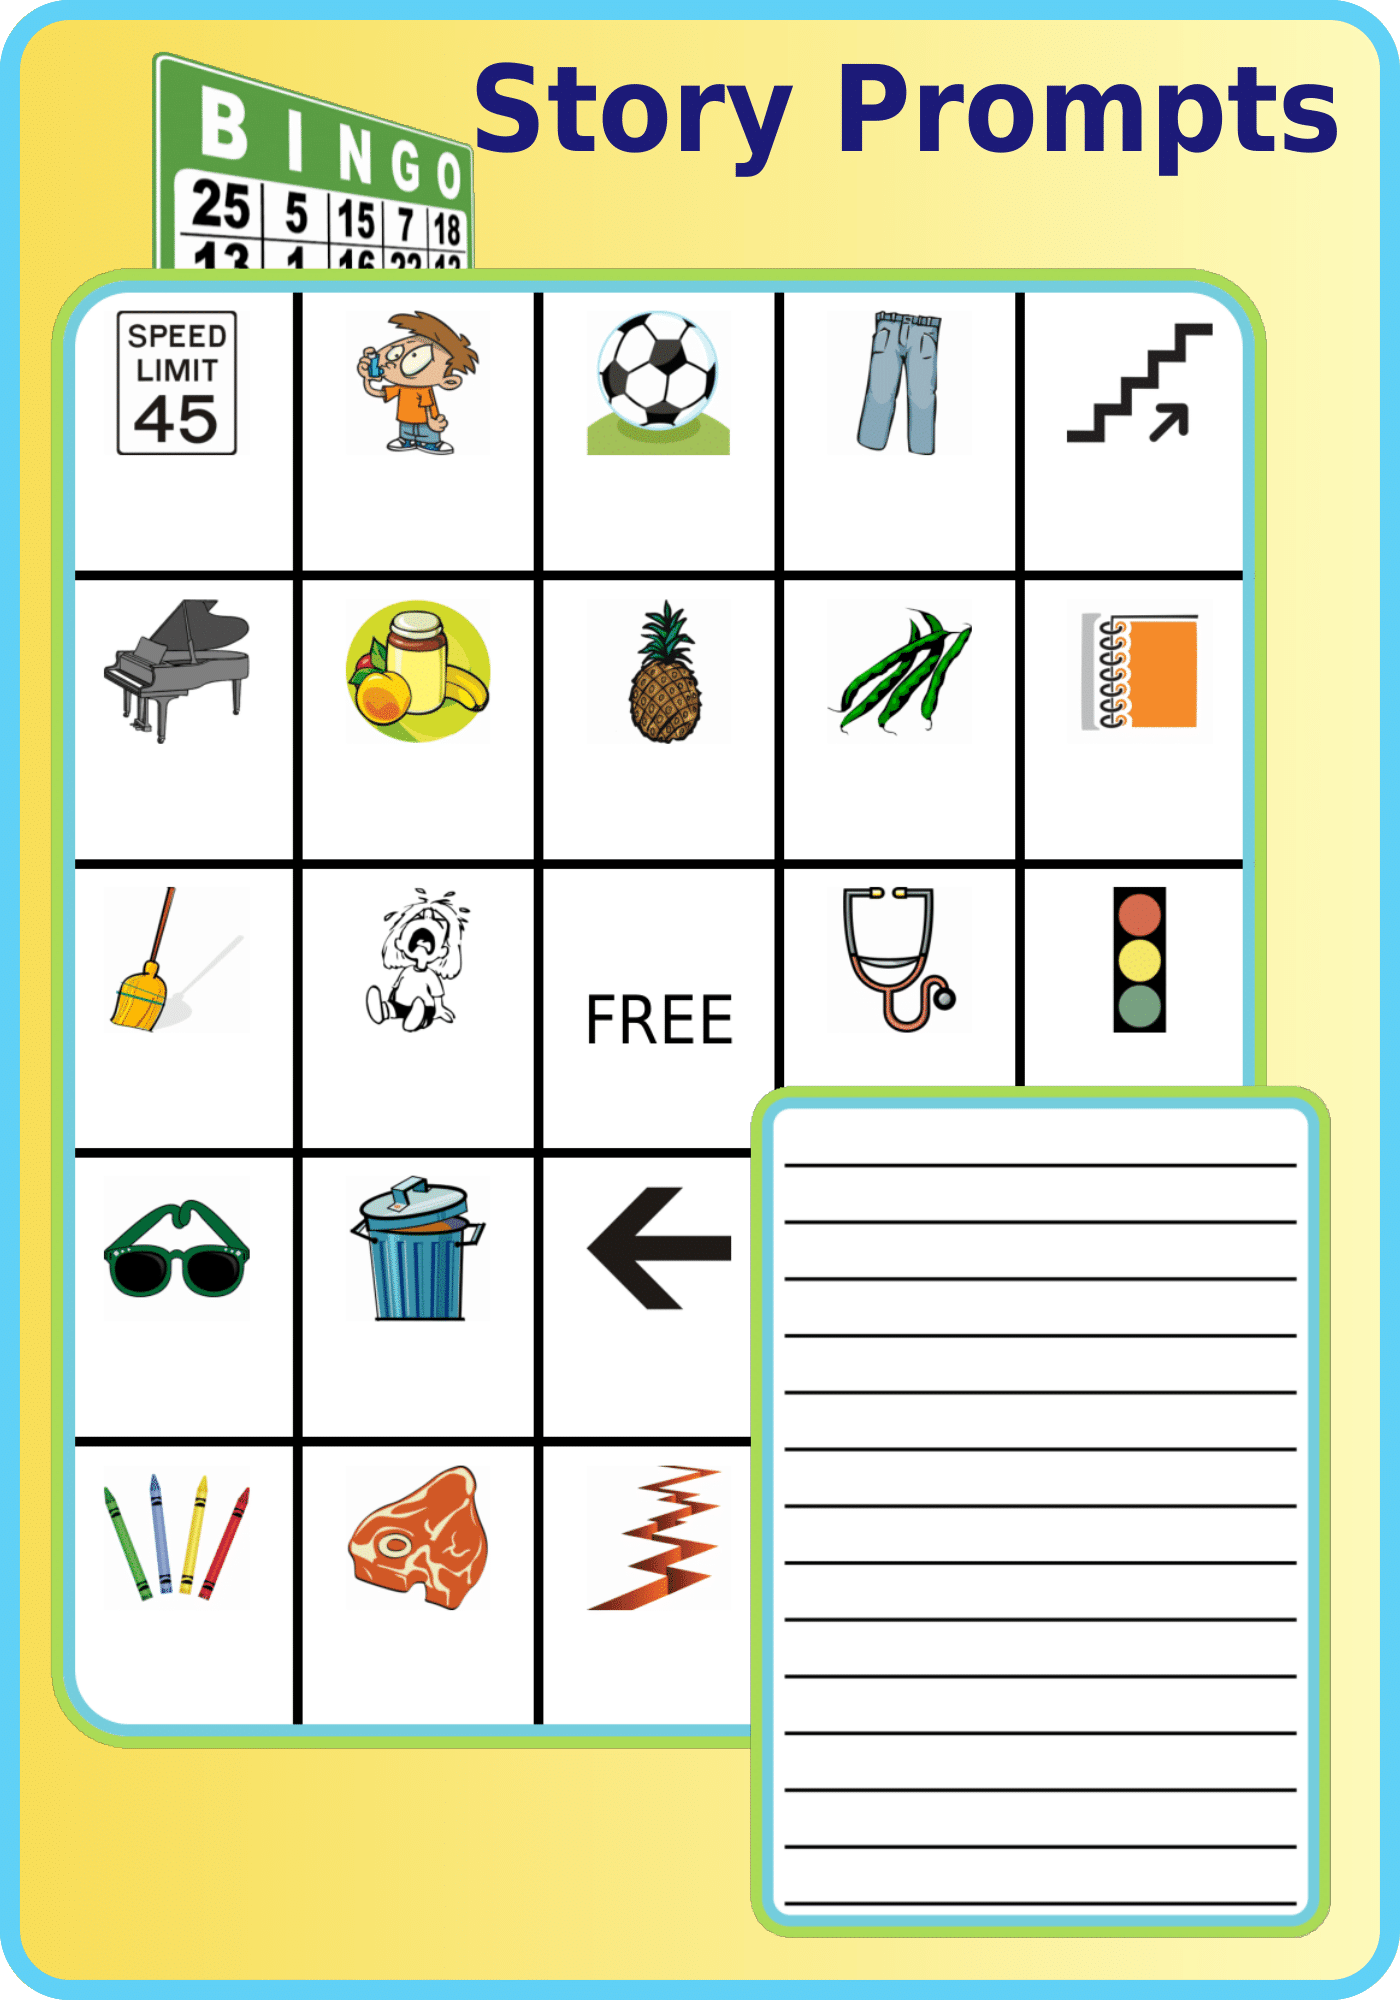 Bingo BOARD with pictures and a lined story template